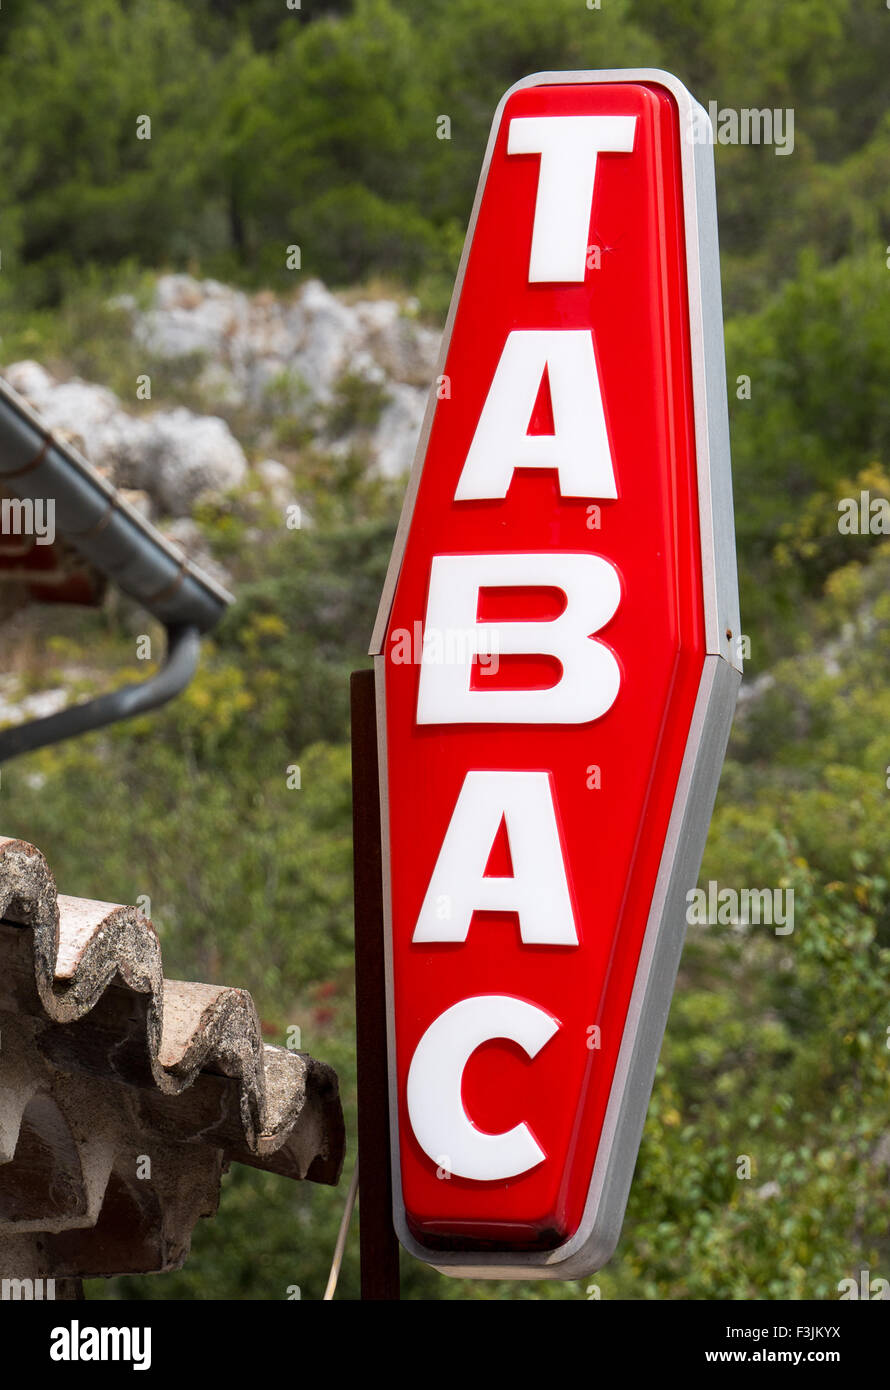 A 'TABAC' sign in Vaucluse, Southern France.  A Tabac is a shop licensed to sell tobacco products in France. Stock Photo